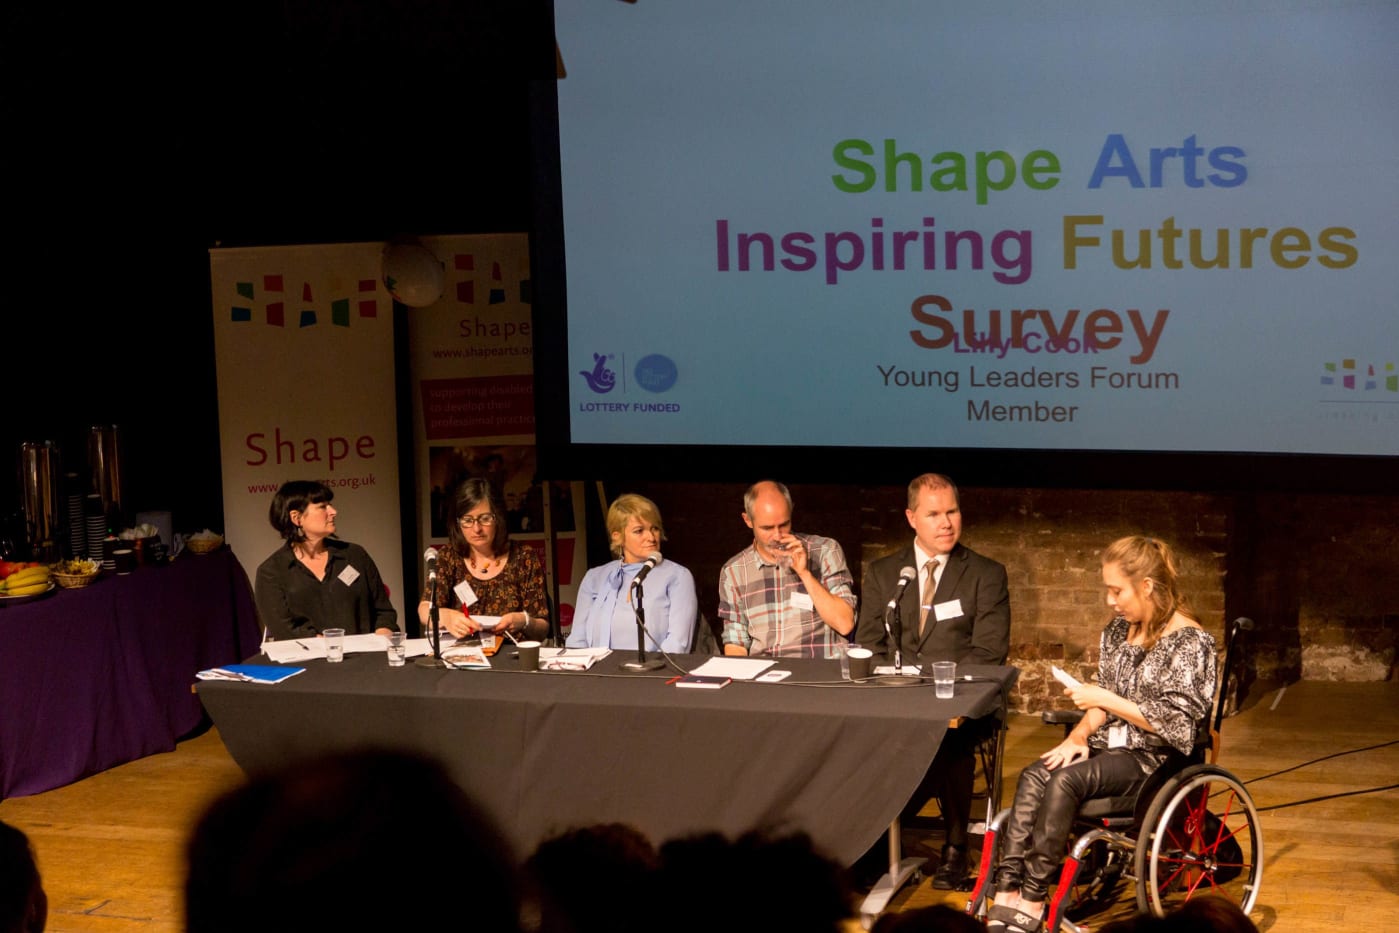 panel discussion at the Roundhouse Inspiring futures event